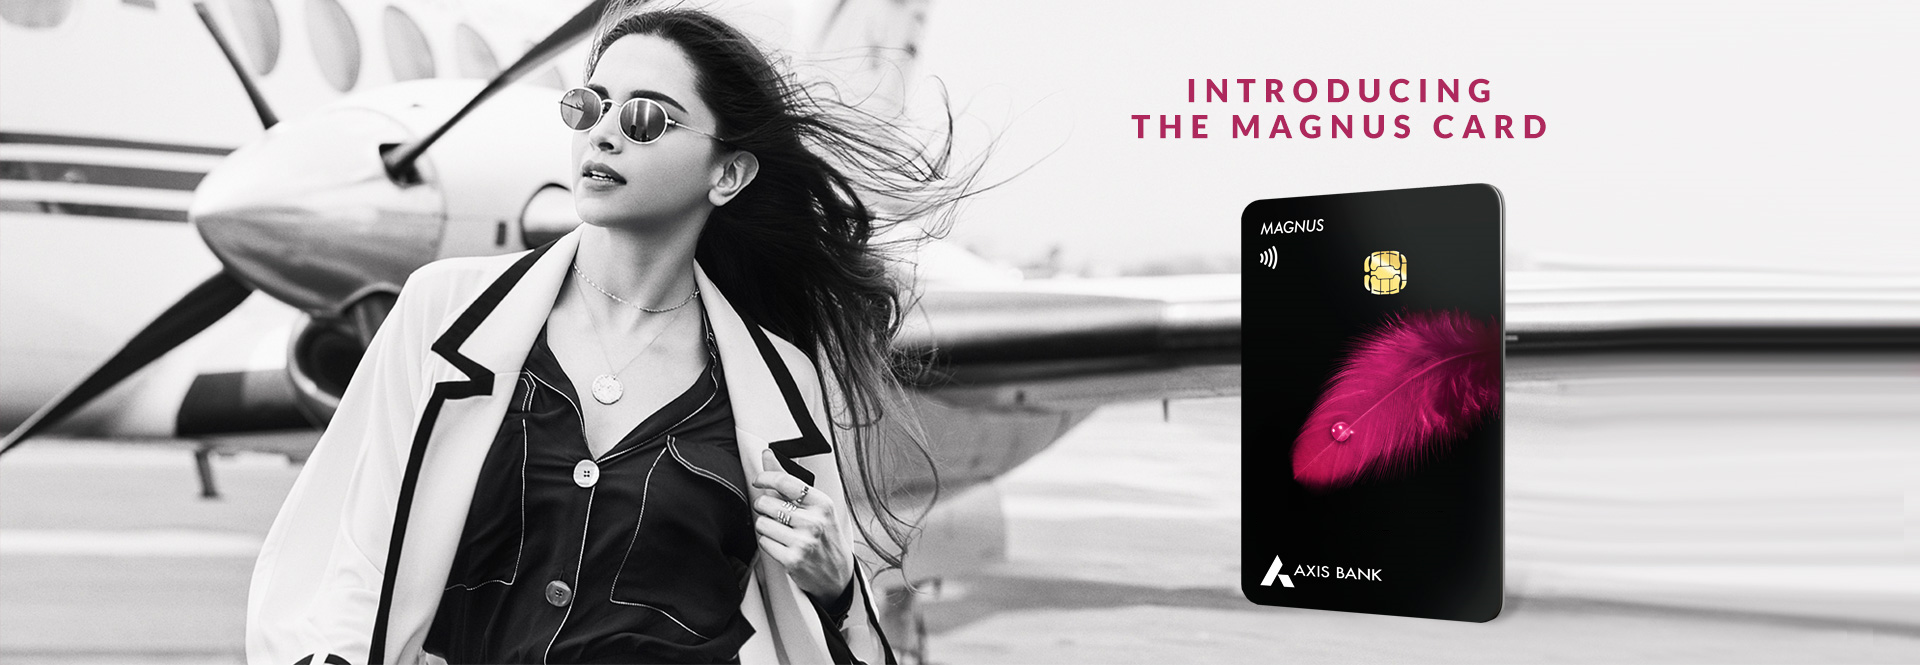 Axis Bank Magnus Card Enjoy Exclusive Travel And Lifestyle Benefits